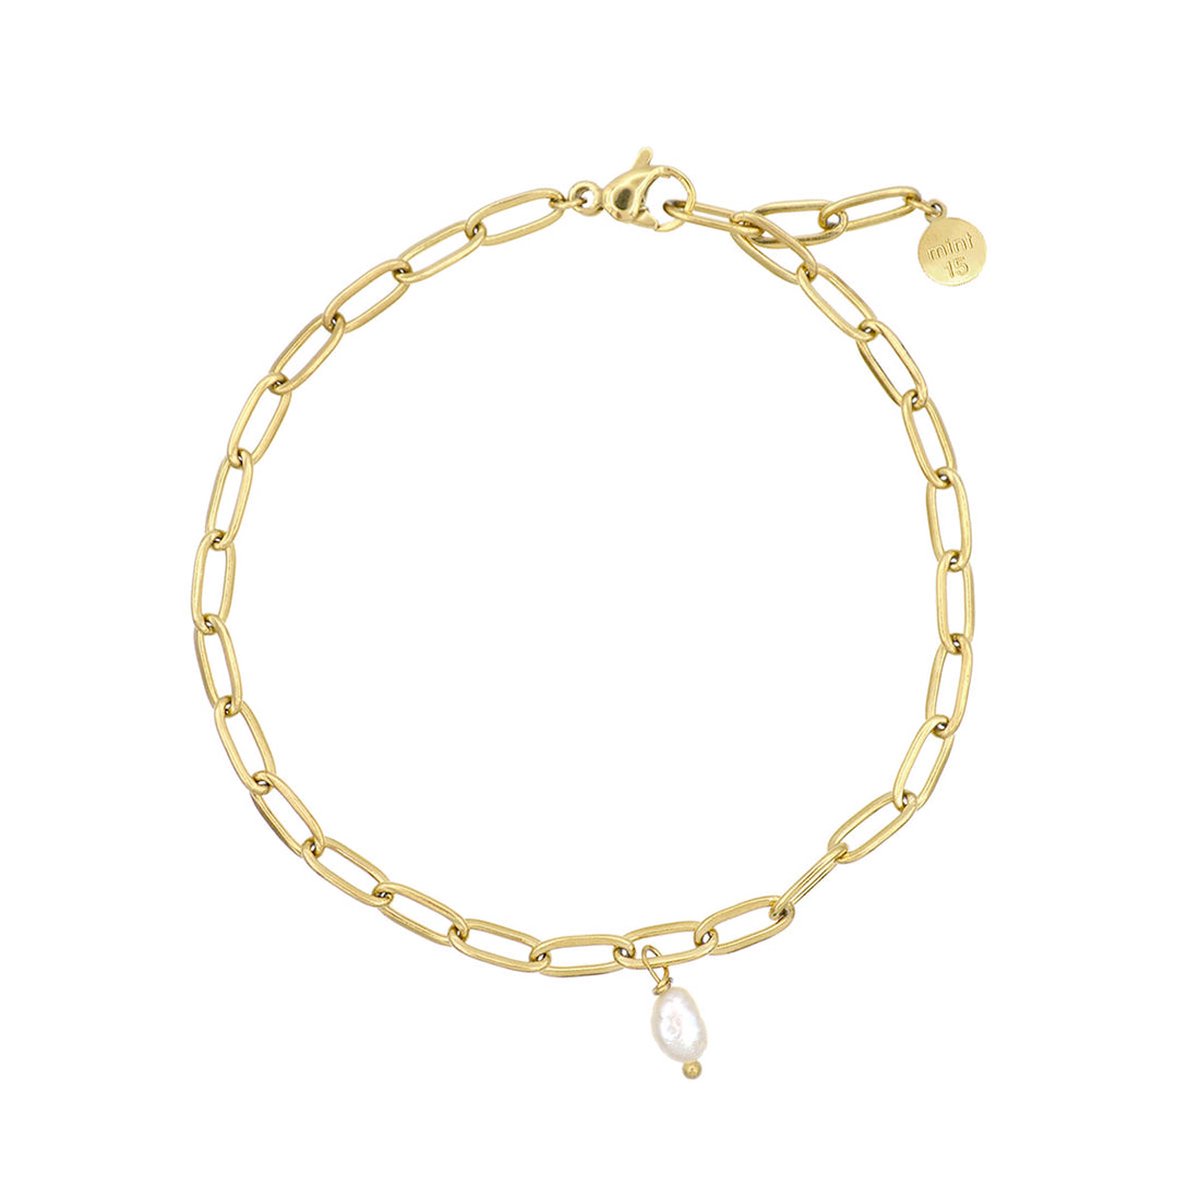 Mint15 Armband 'Chain & Tiny Pearl' - Zoetwaterparel - Goud RVS/Stainless Steel